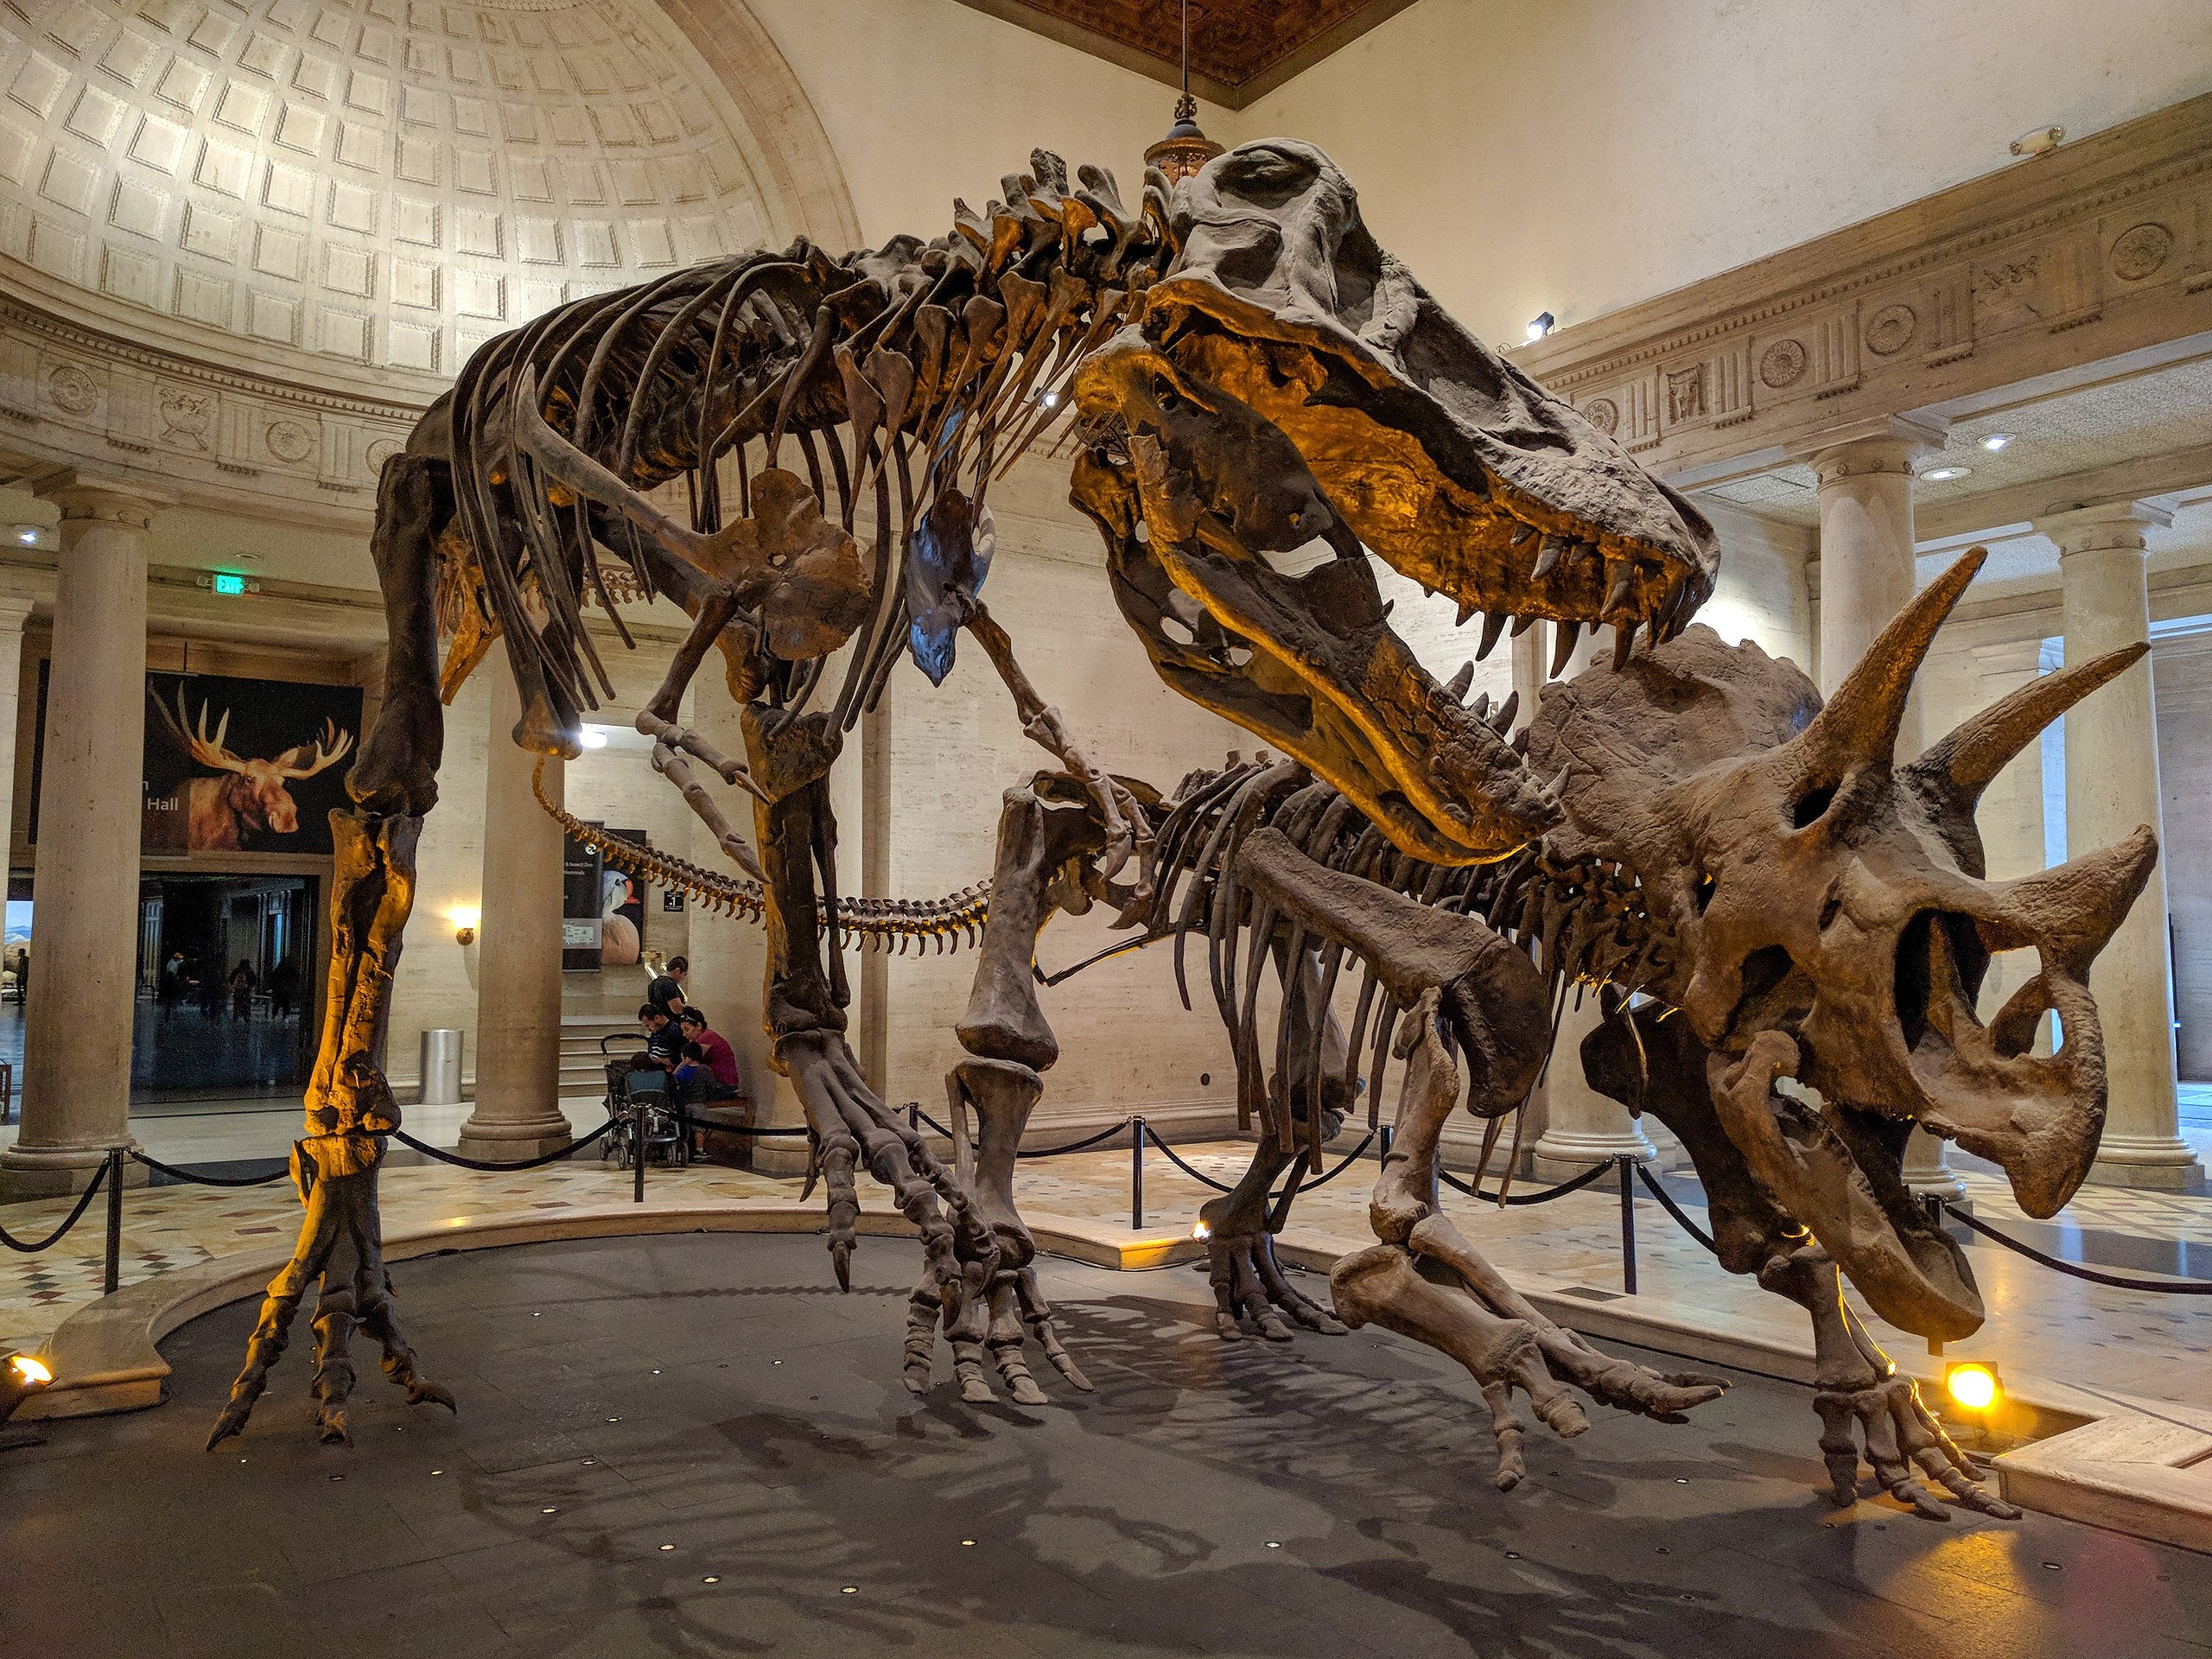 All birds are dinosaurs, but not all dinosaurs are birds. Here, a Tyrannosaurus skeleton is mounted next to a Triceratops skeleton at the Los Angeles Natural History Museum. (Image: Matthew Dillon, Fair Use)